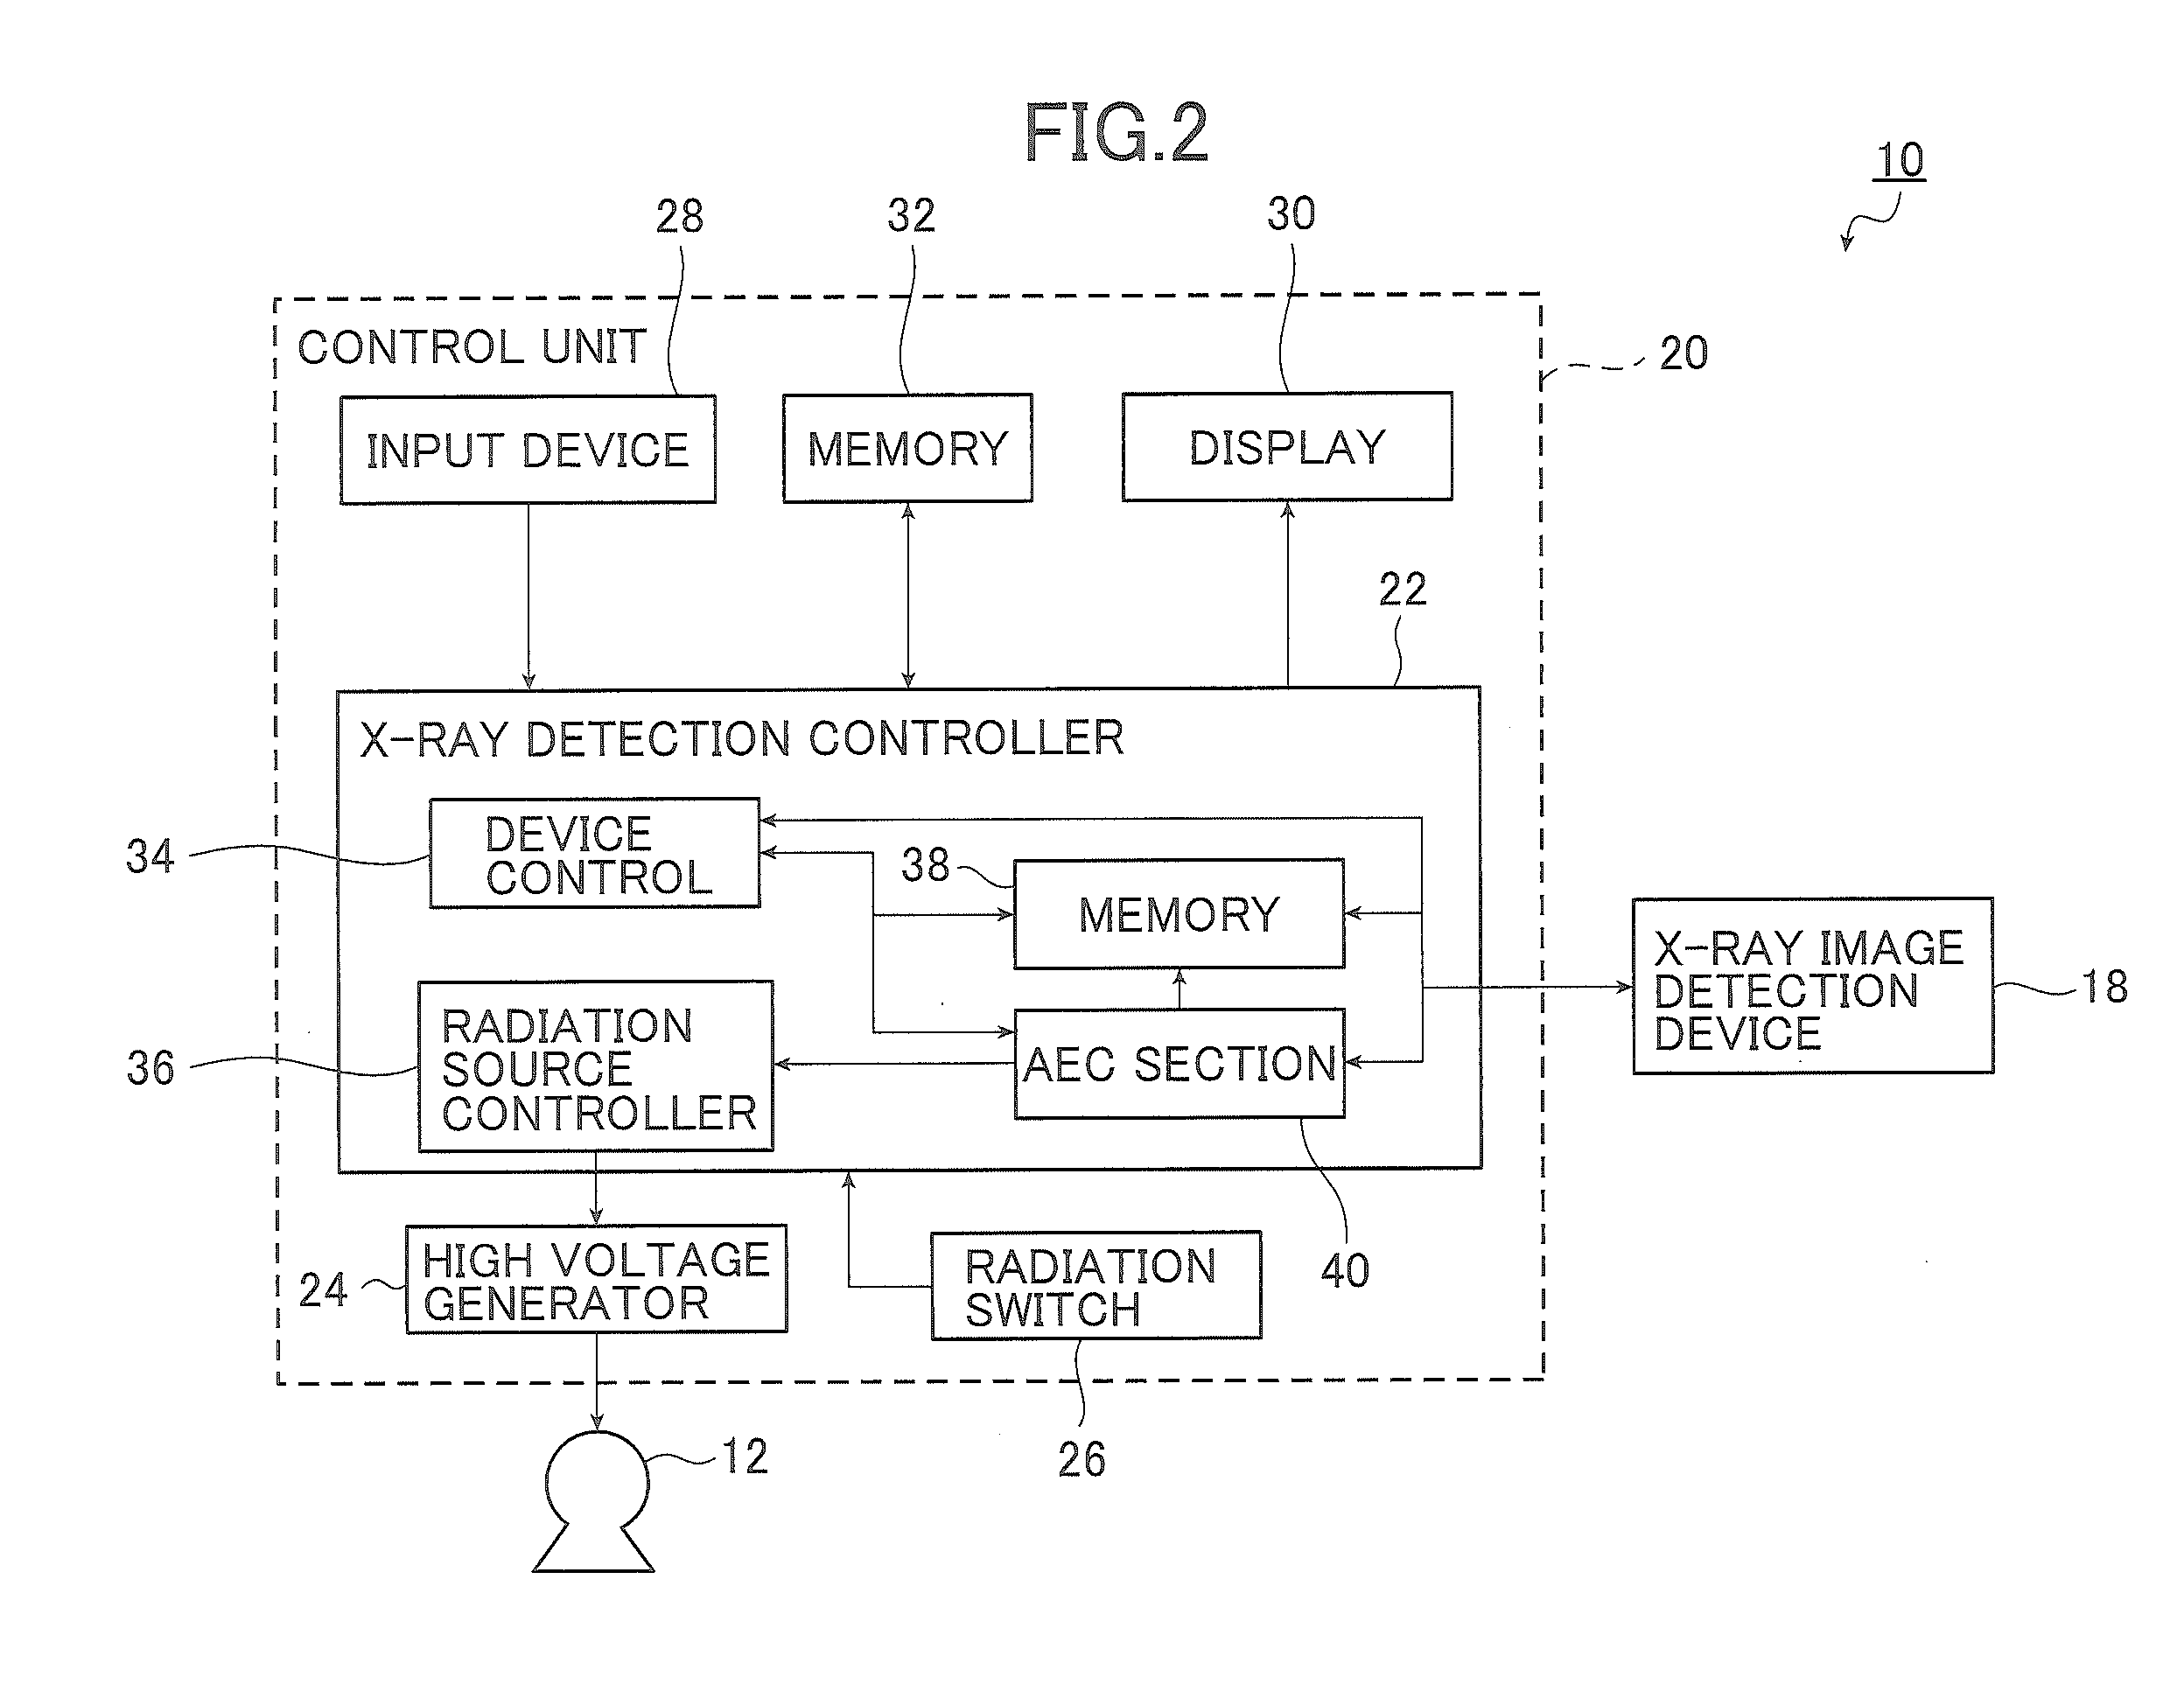 X-Ray Exposure Control Device, X-Ray Image Detection Apparatus, and X-Ray Imaging System